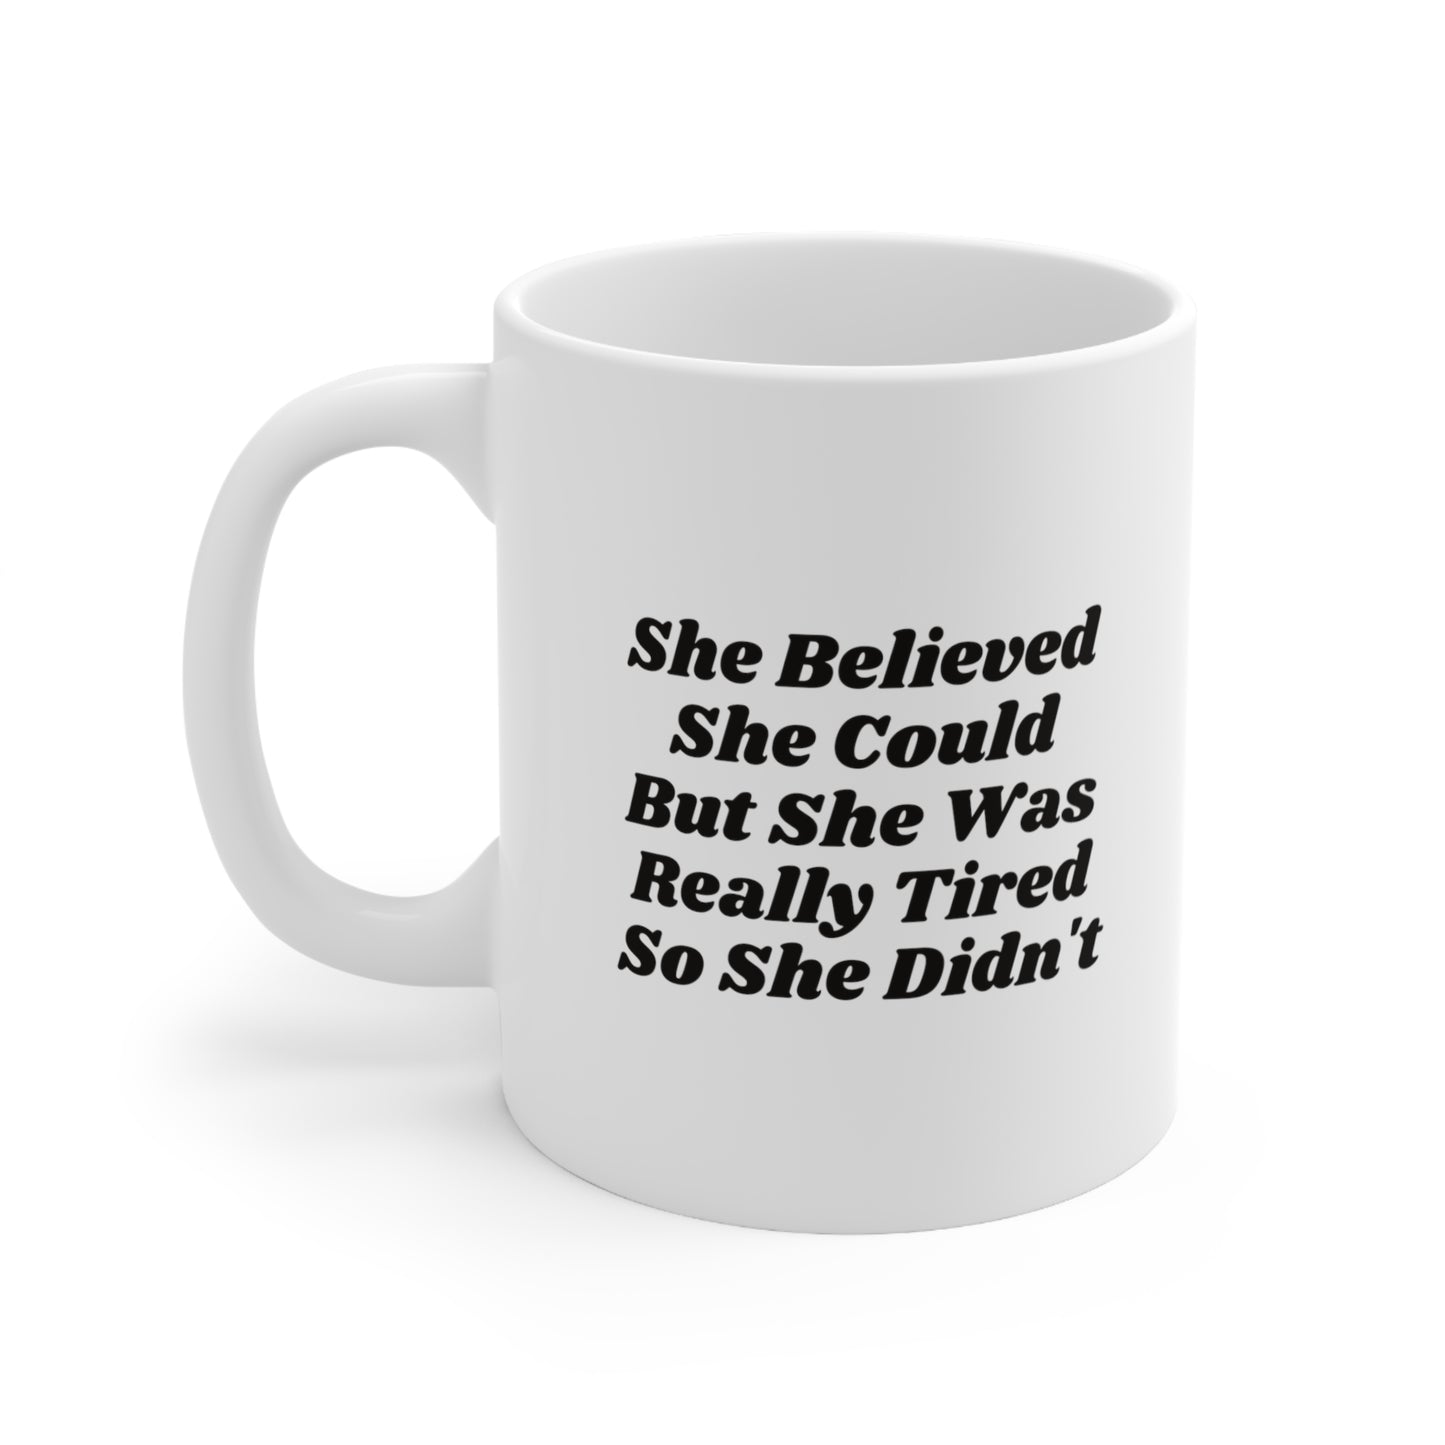 She Believed She Could but she was really tired So She Didn't Mug